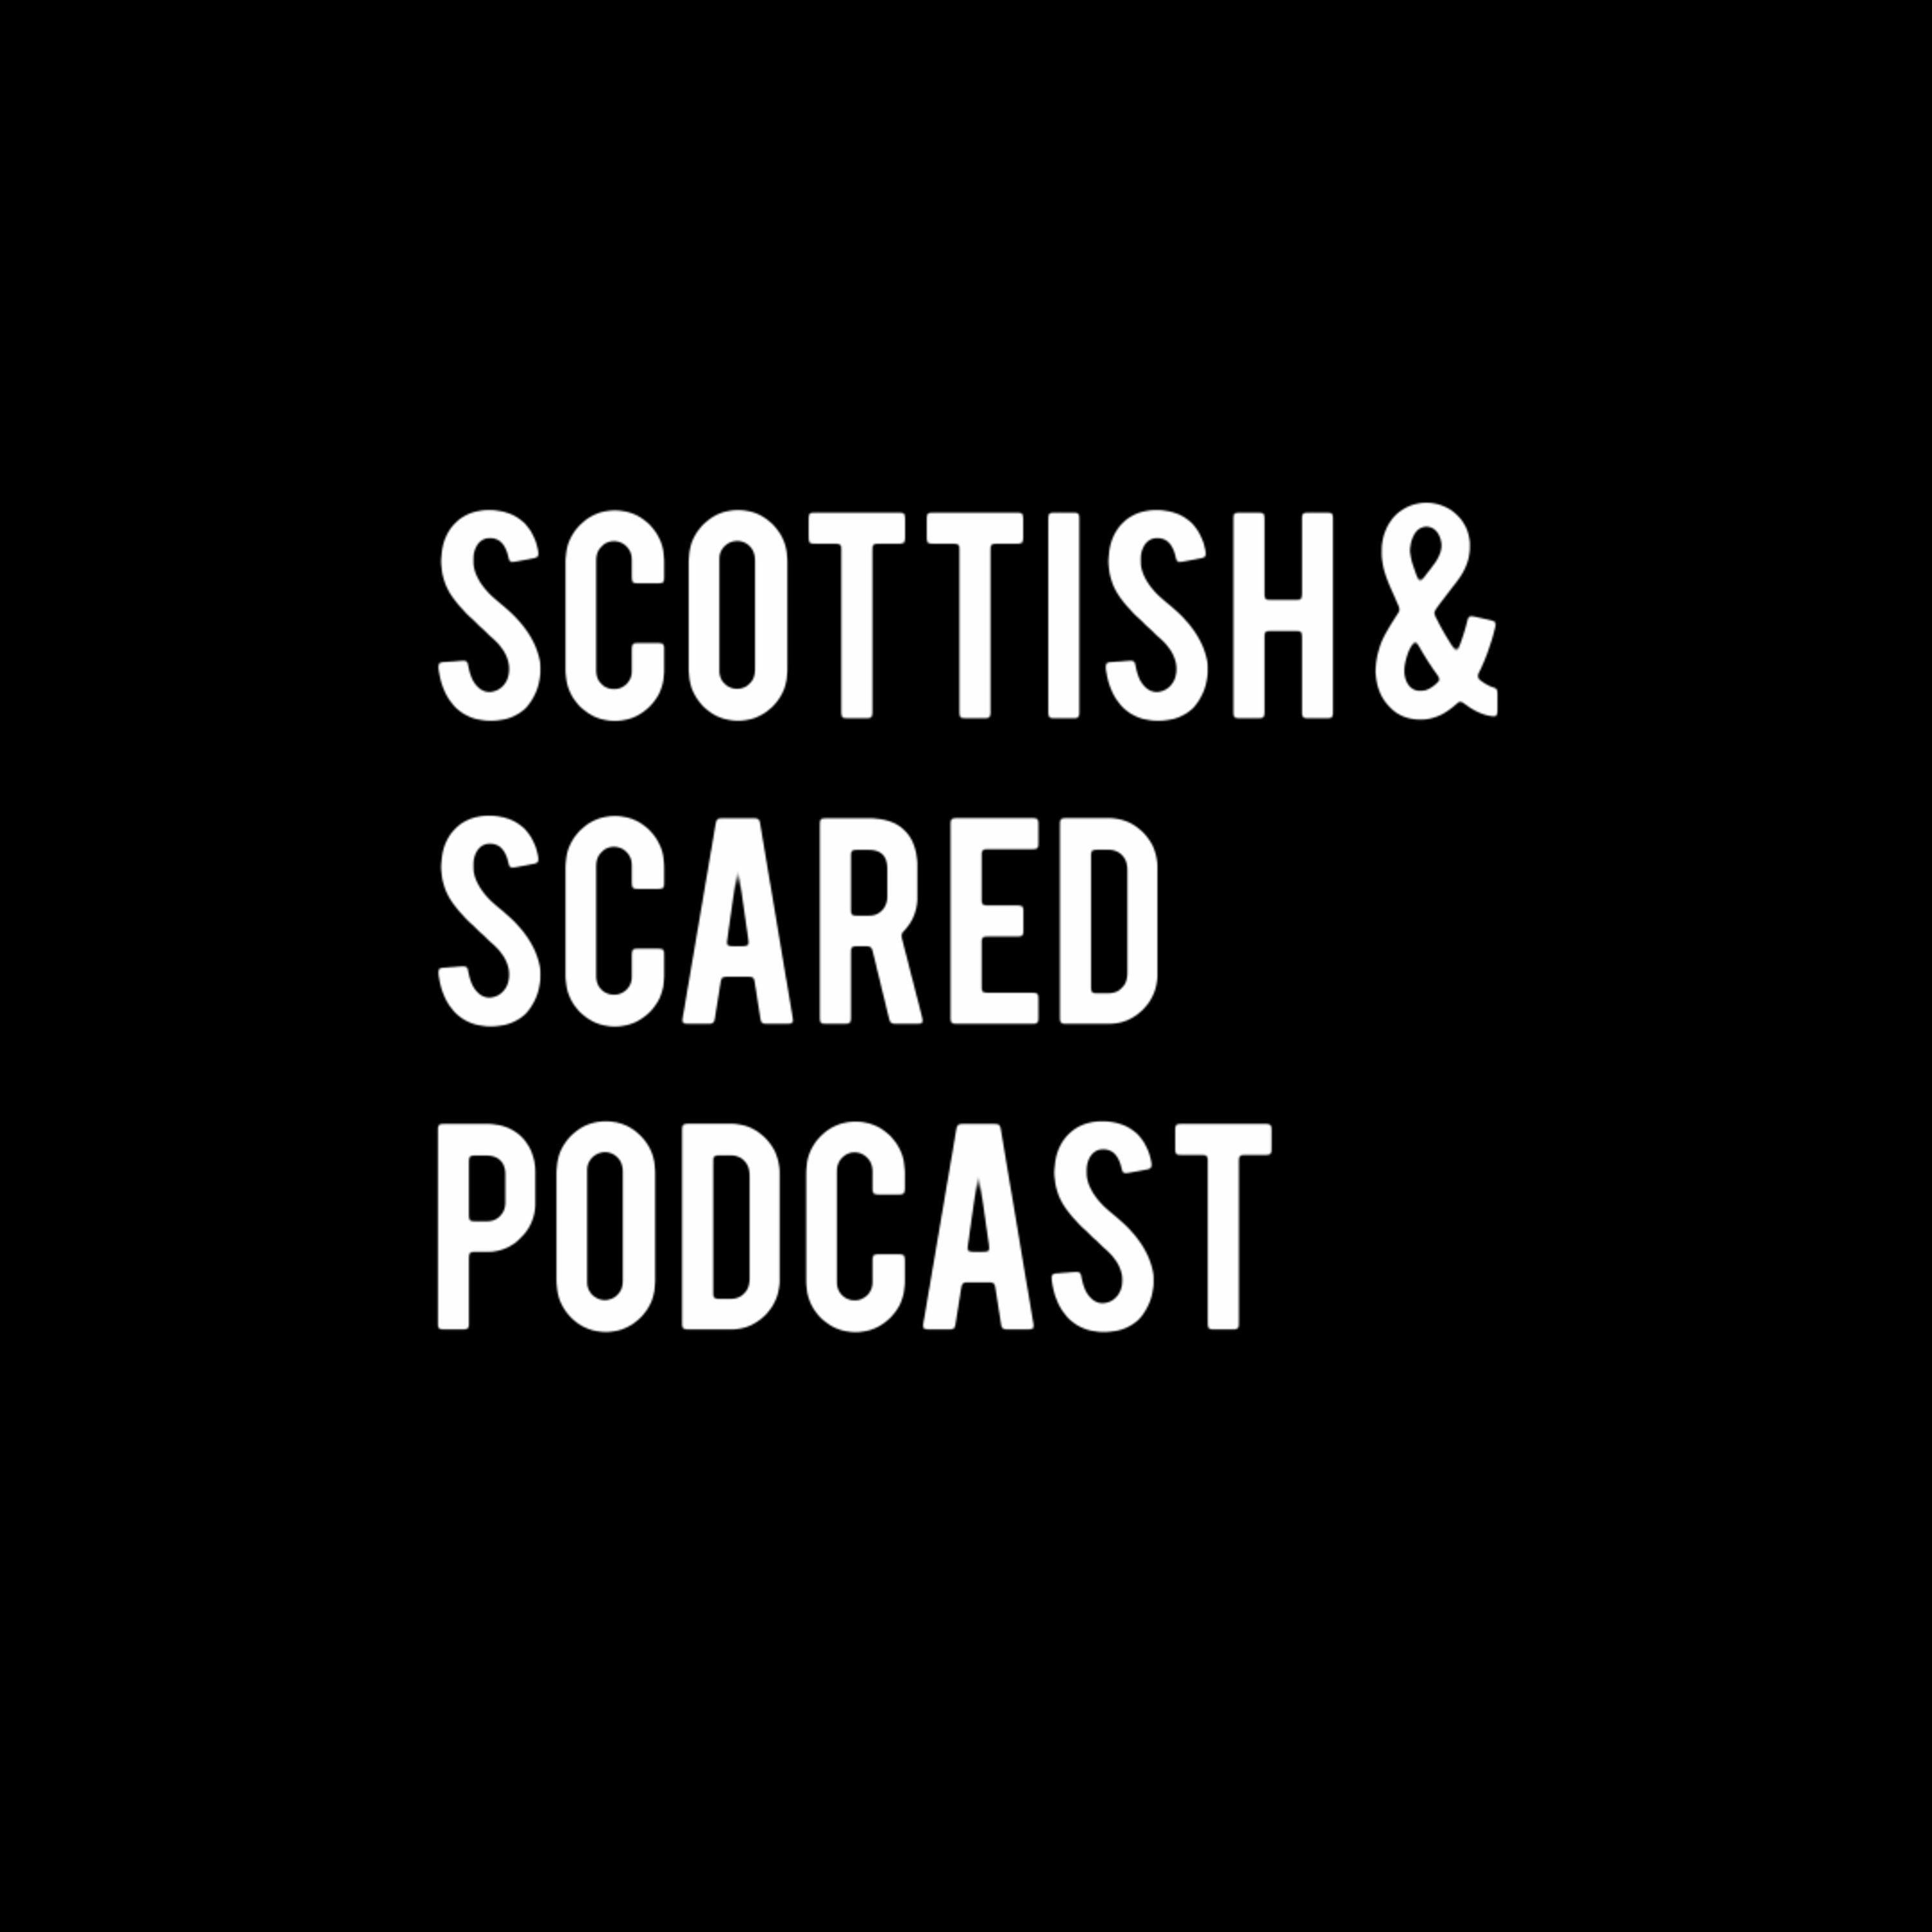 Scottish Collaboration Episode 9: Terrible Music & The Little Pod Of Insipration